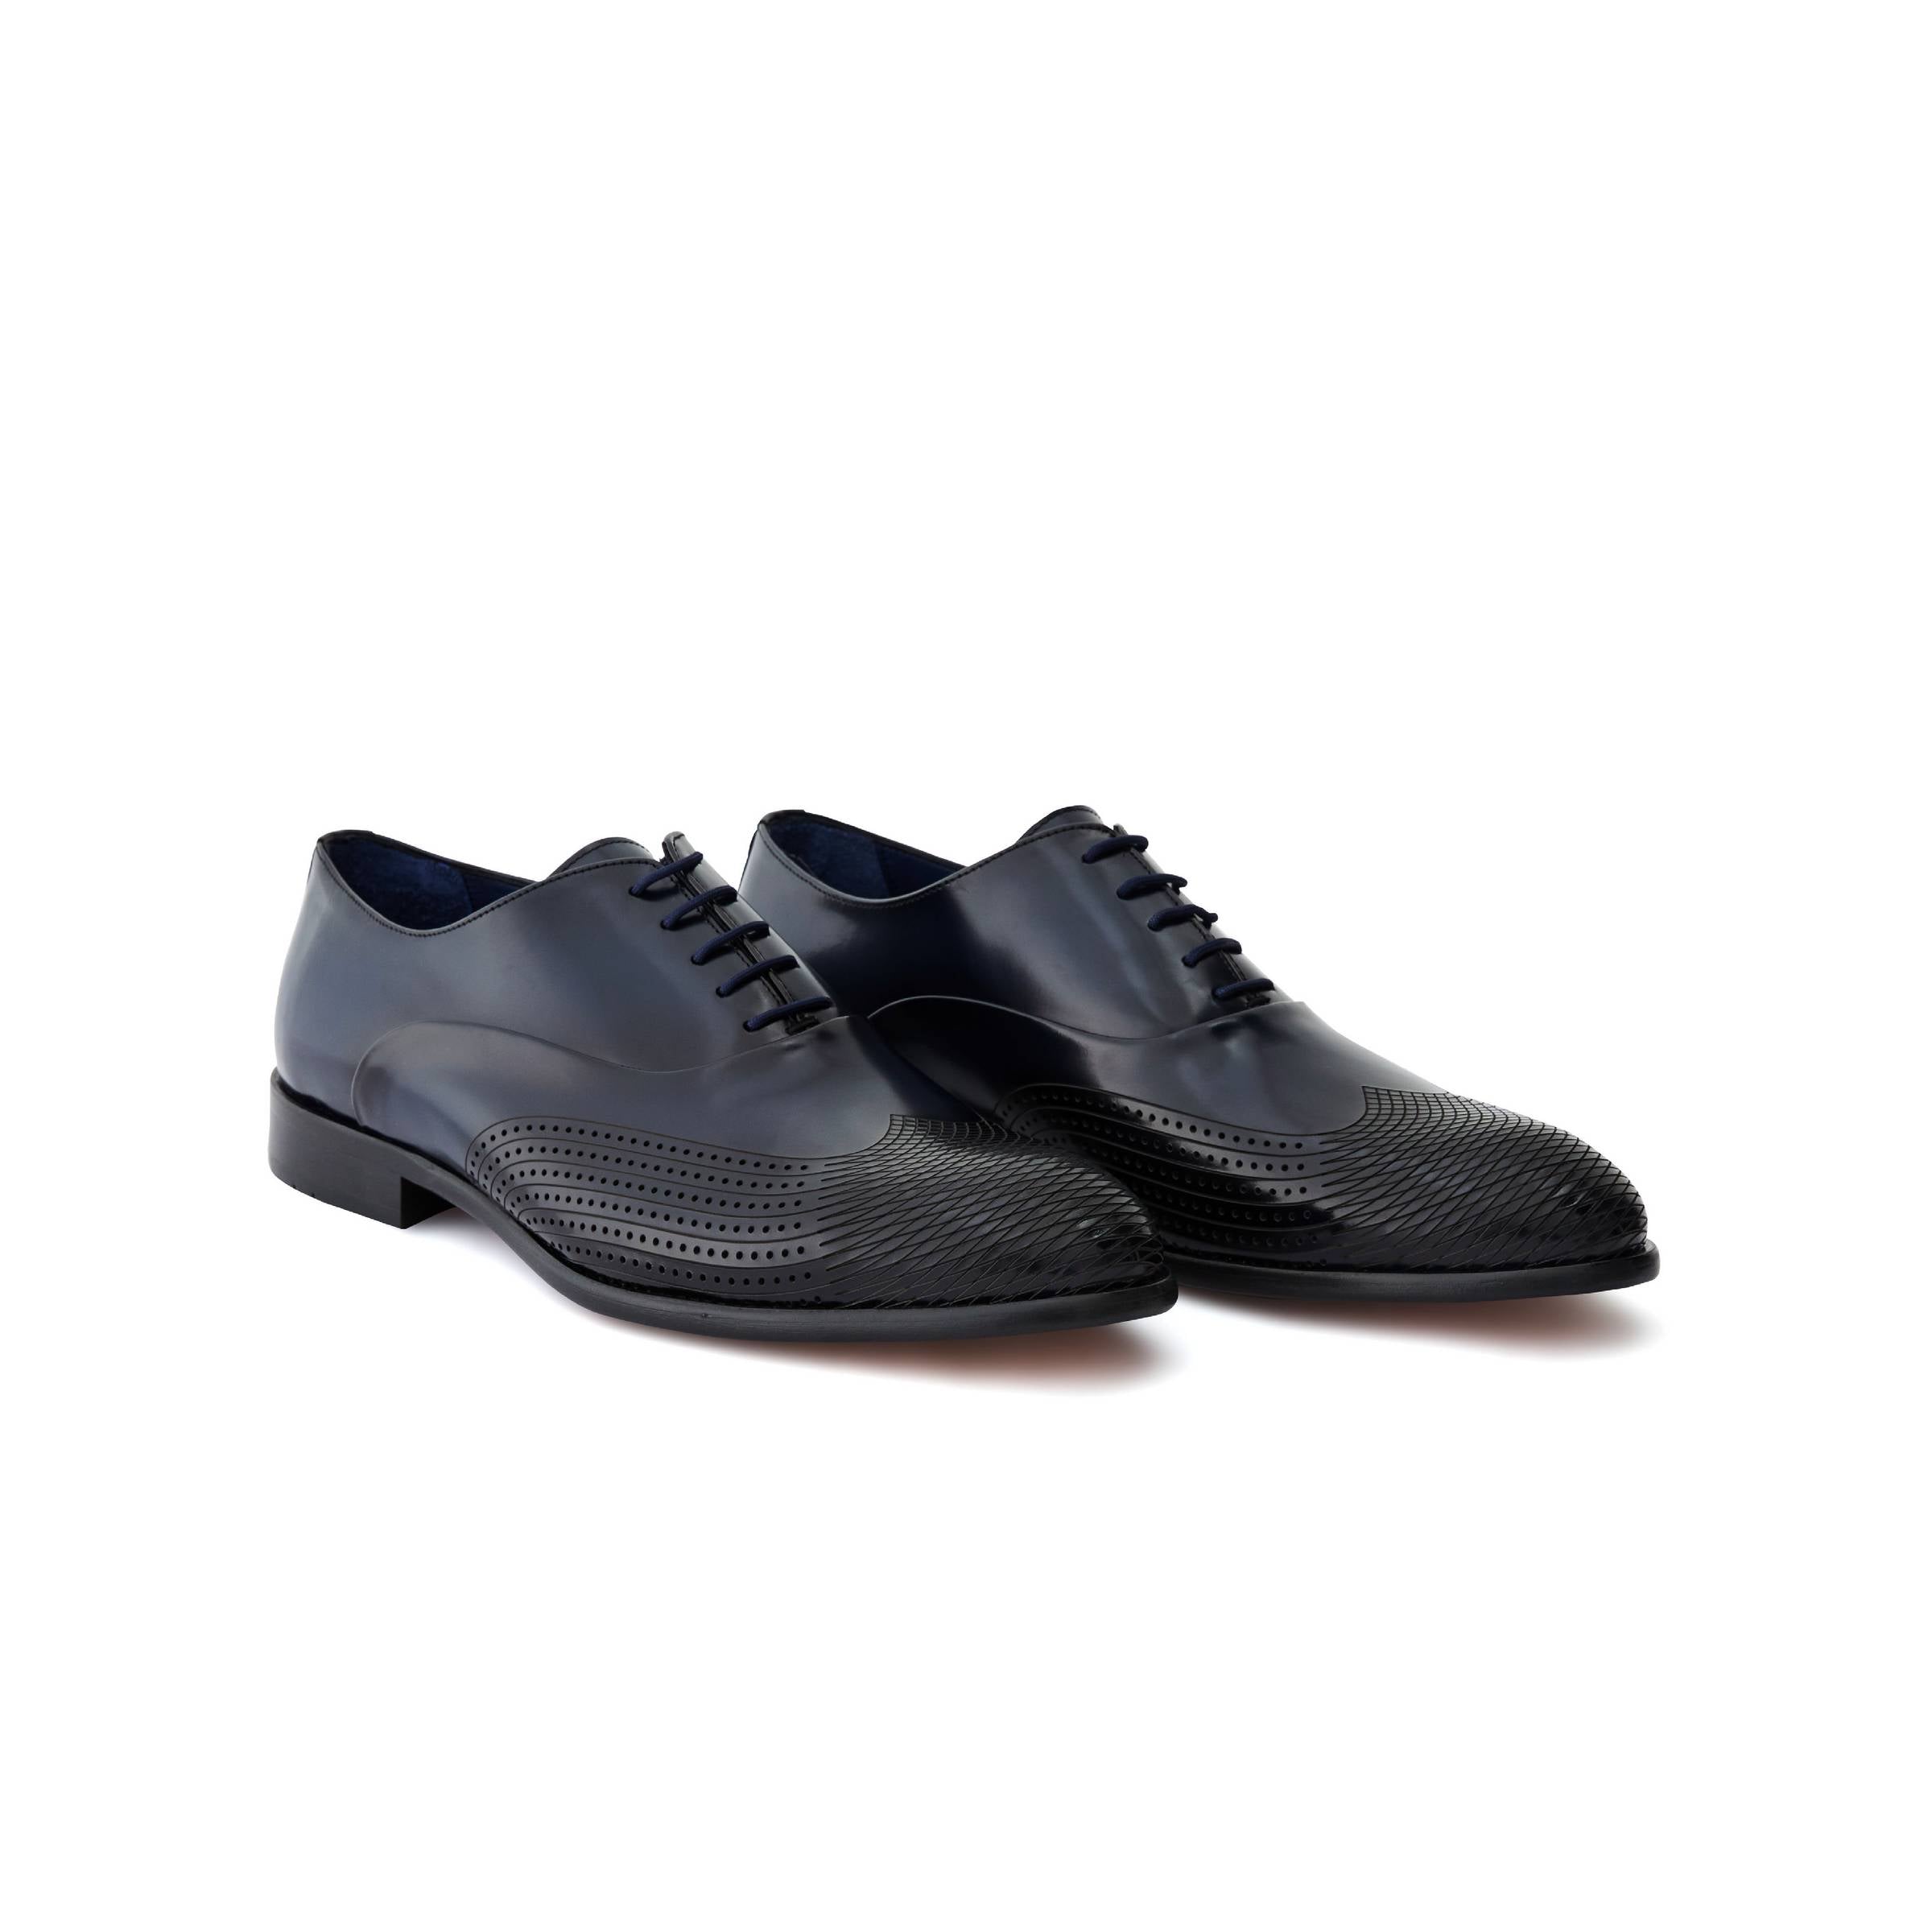 Men's Calf Leather Lace Up Handmade Oxford M7038